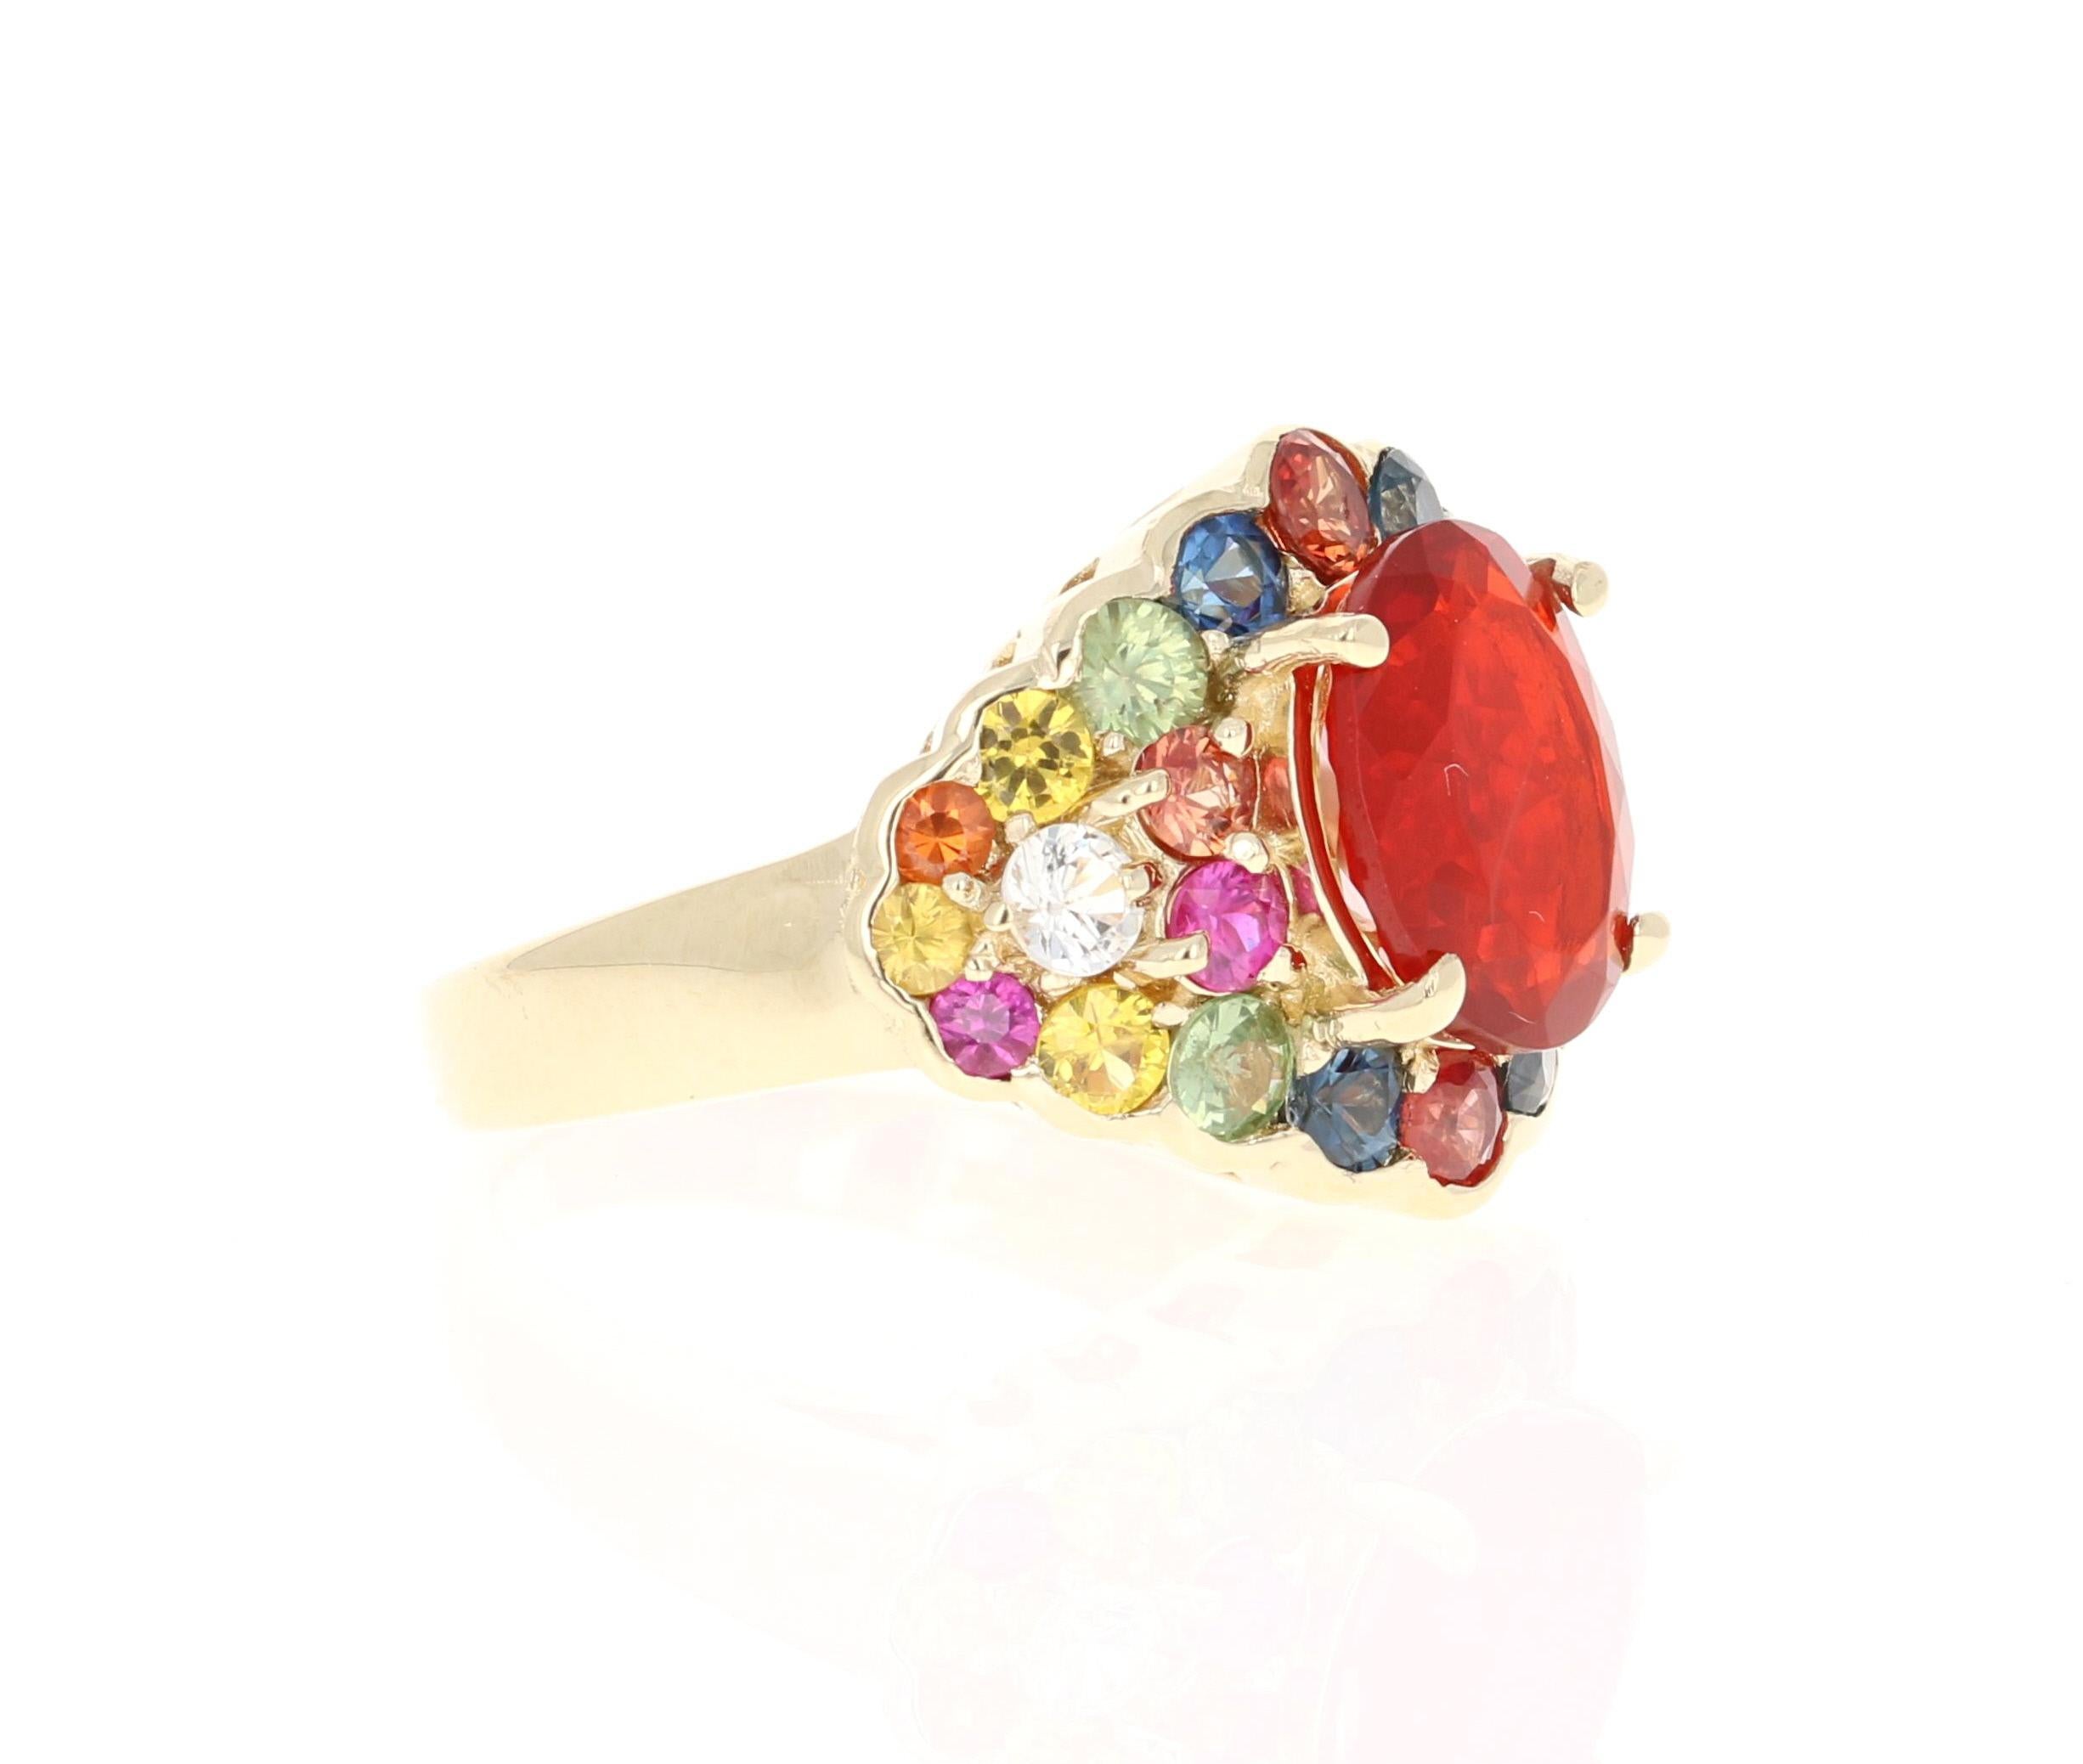 This ring has a 2.00 Carat Oval Cut Fire Opal as its center stone and is elegantly surrounded by 26 Round Cut Multi-Colored Sapphires that weigh 2.75 Carats. The measurements of the Fire Opal are 11 mm x 9 mm. 
The total carat weight of this ring is